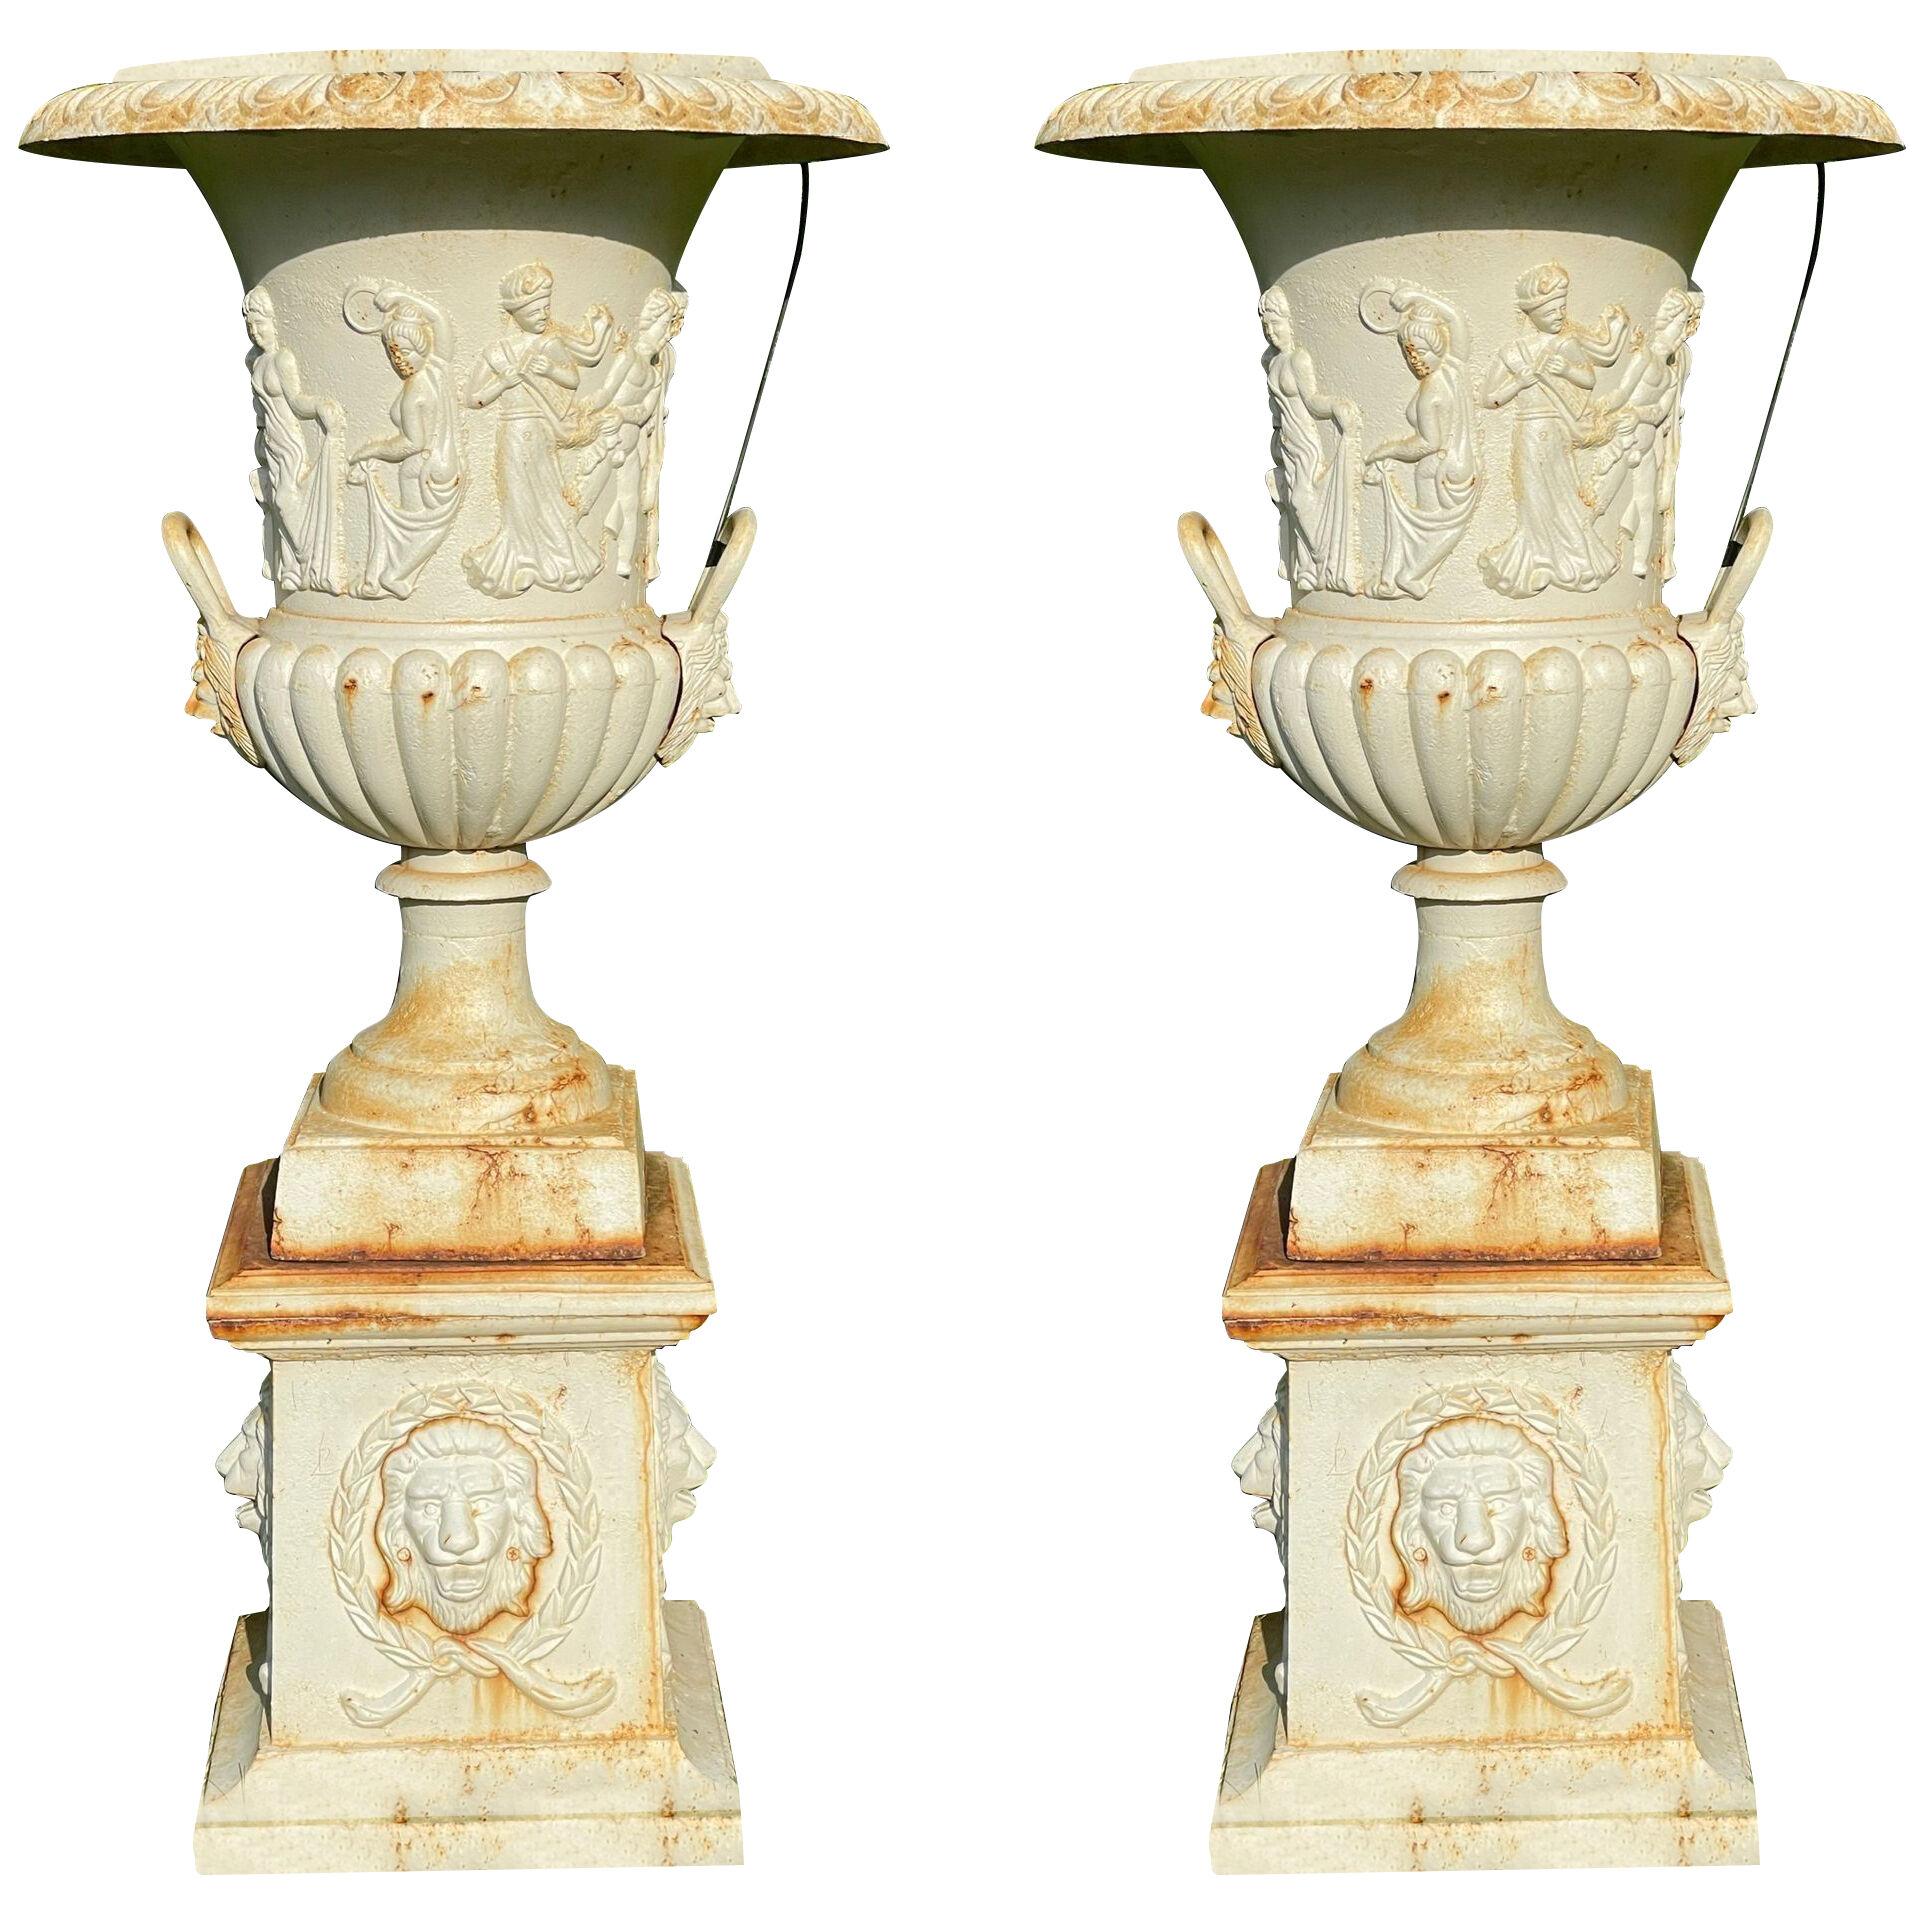 Pair of Cast Iron Urn or Planters, Barbara Israel Collection, 1880s